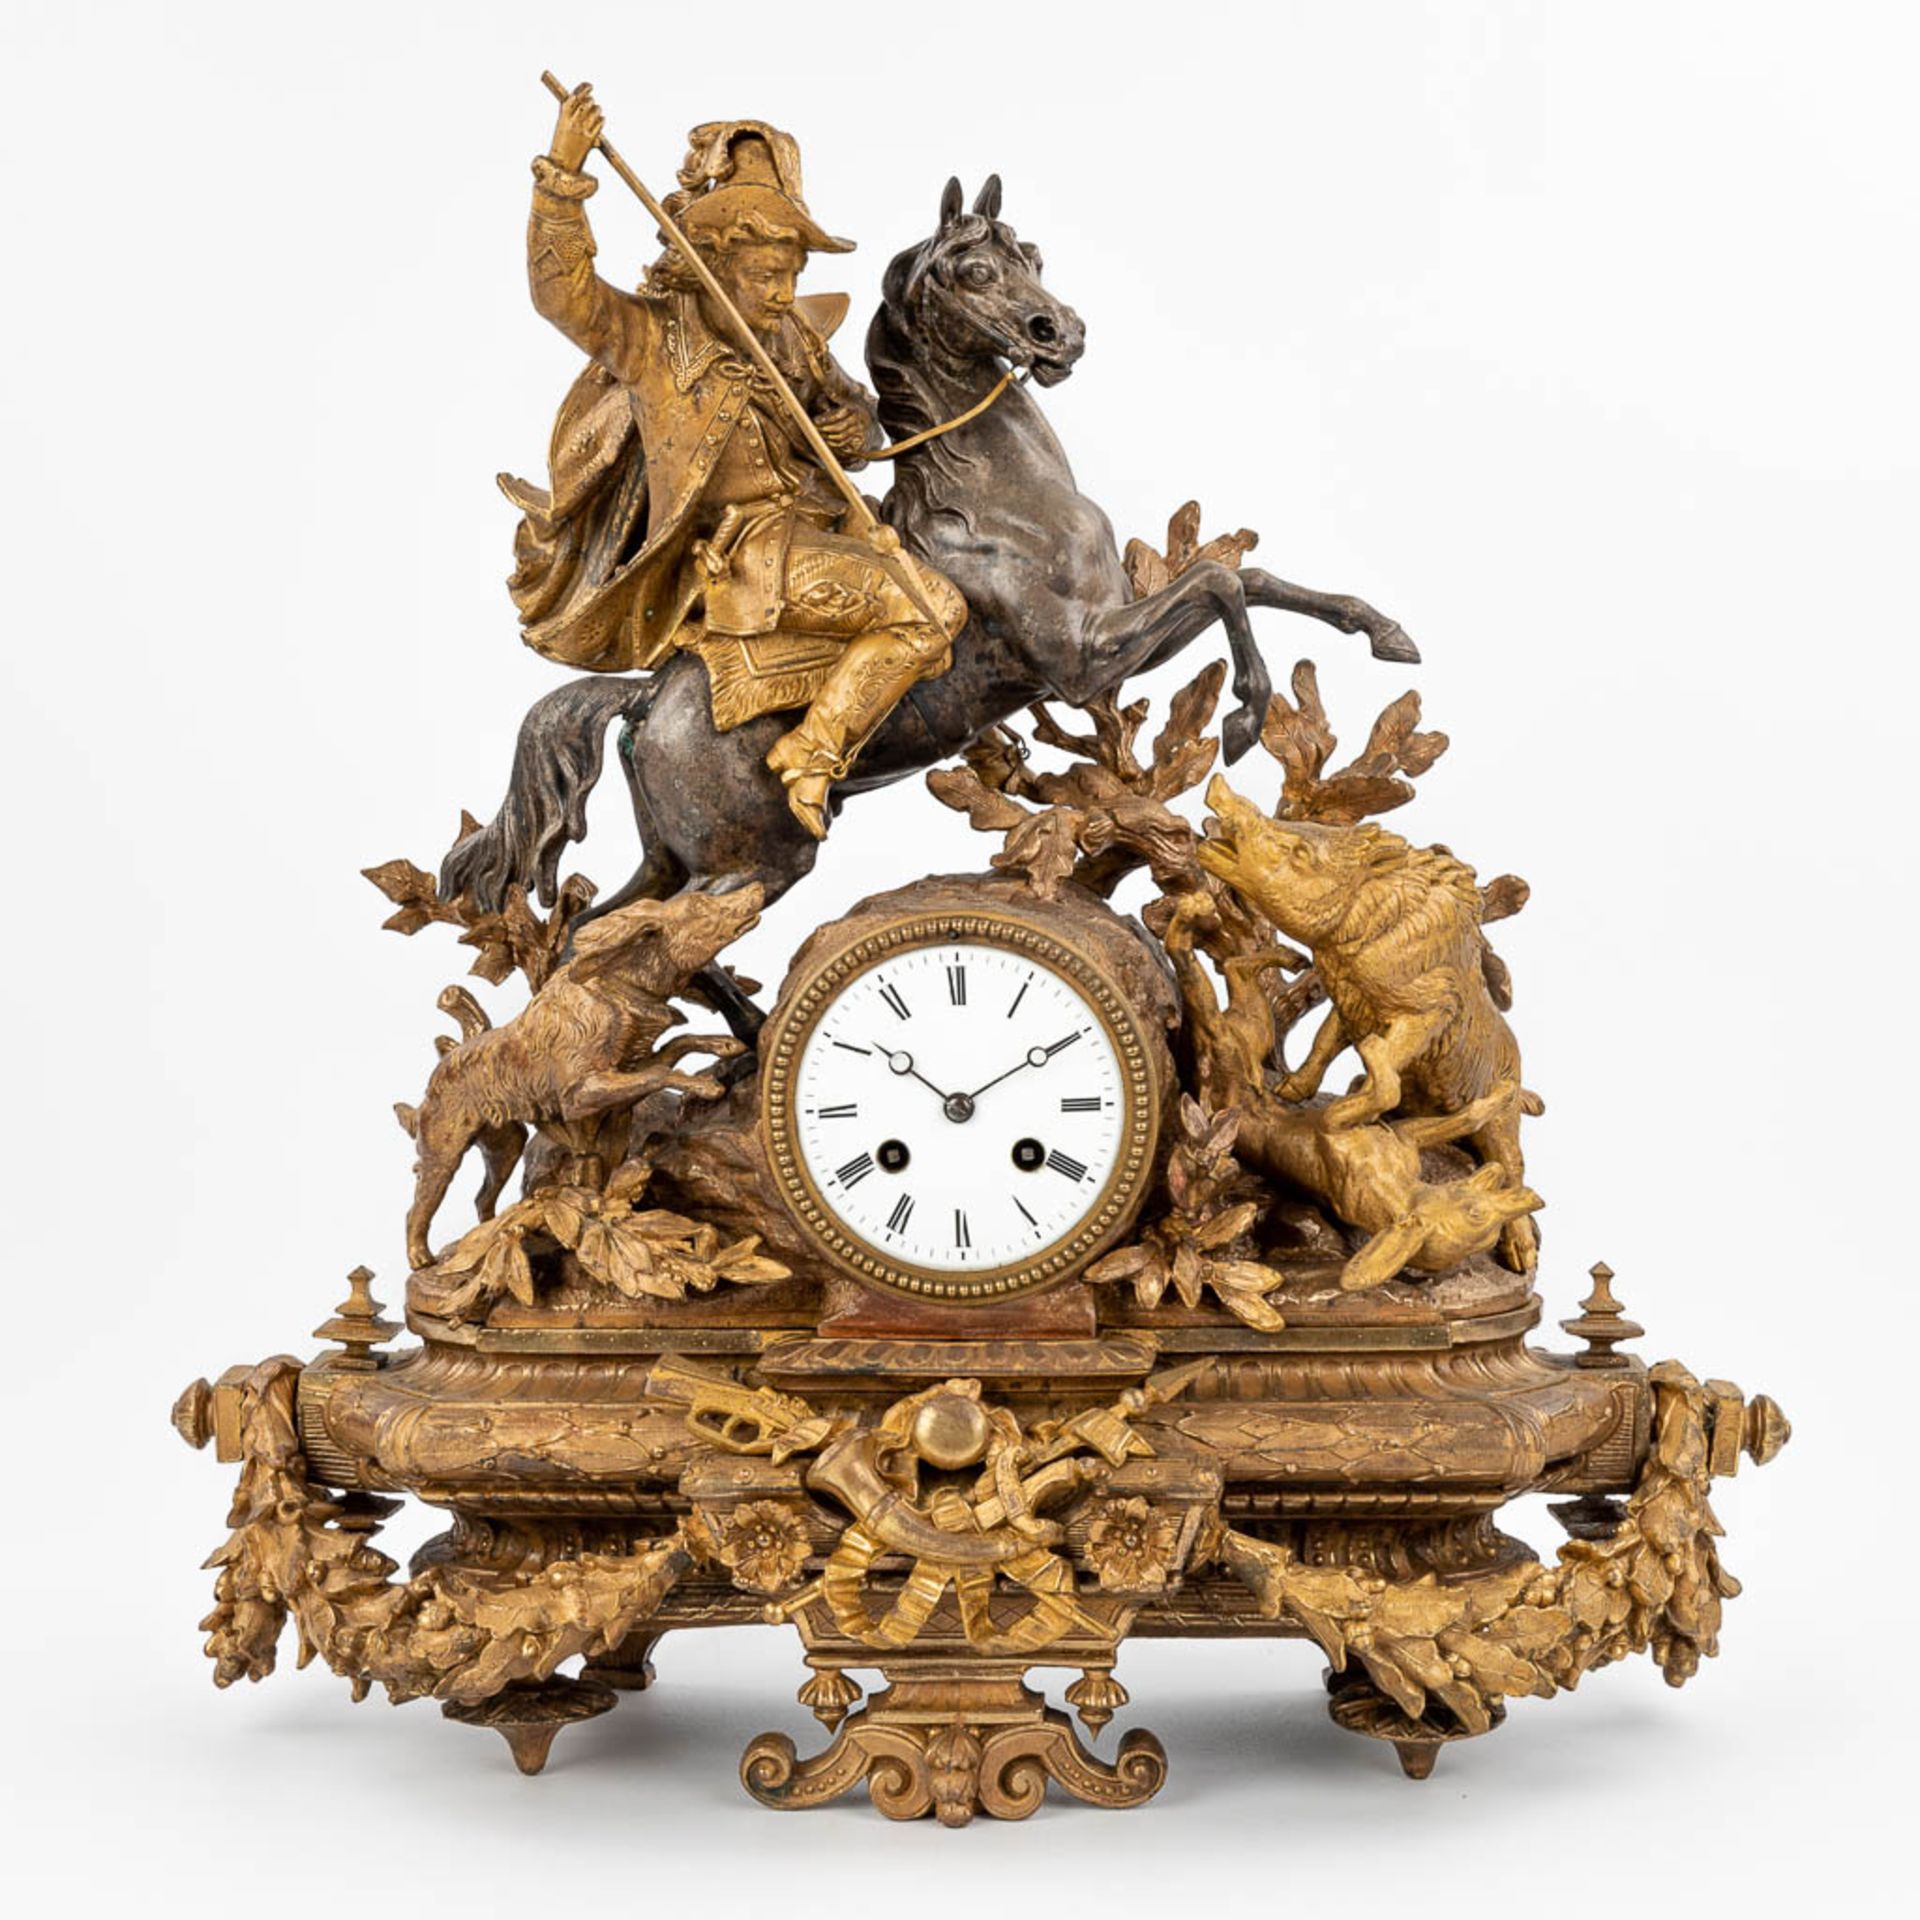 An antique mantle clock with hunting scne, gold-plated spelter. (17 x 47 x 48cm)